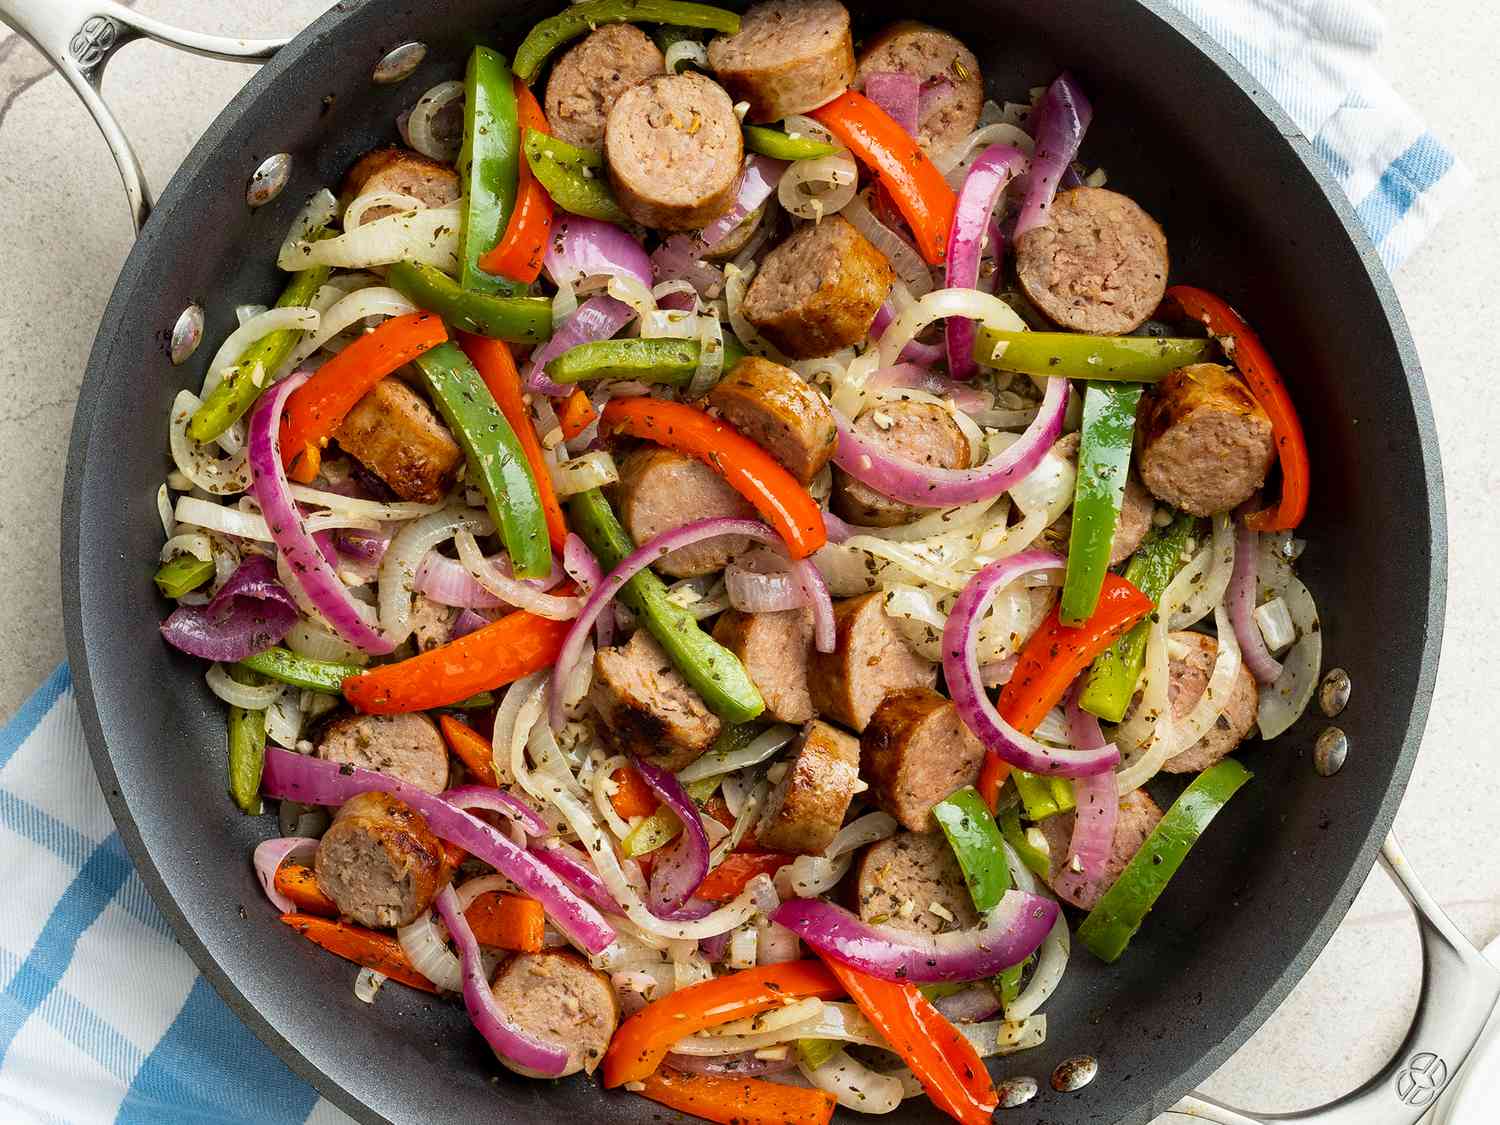 Overhead view looking into a skillet of Italian sausage, peppers and onions.